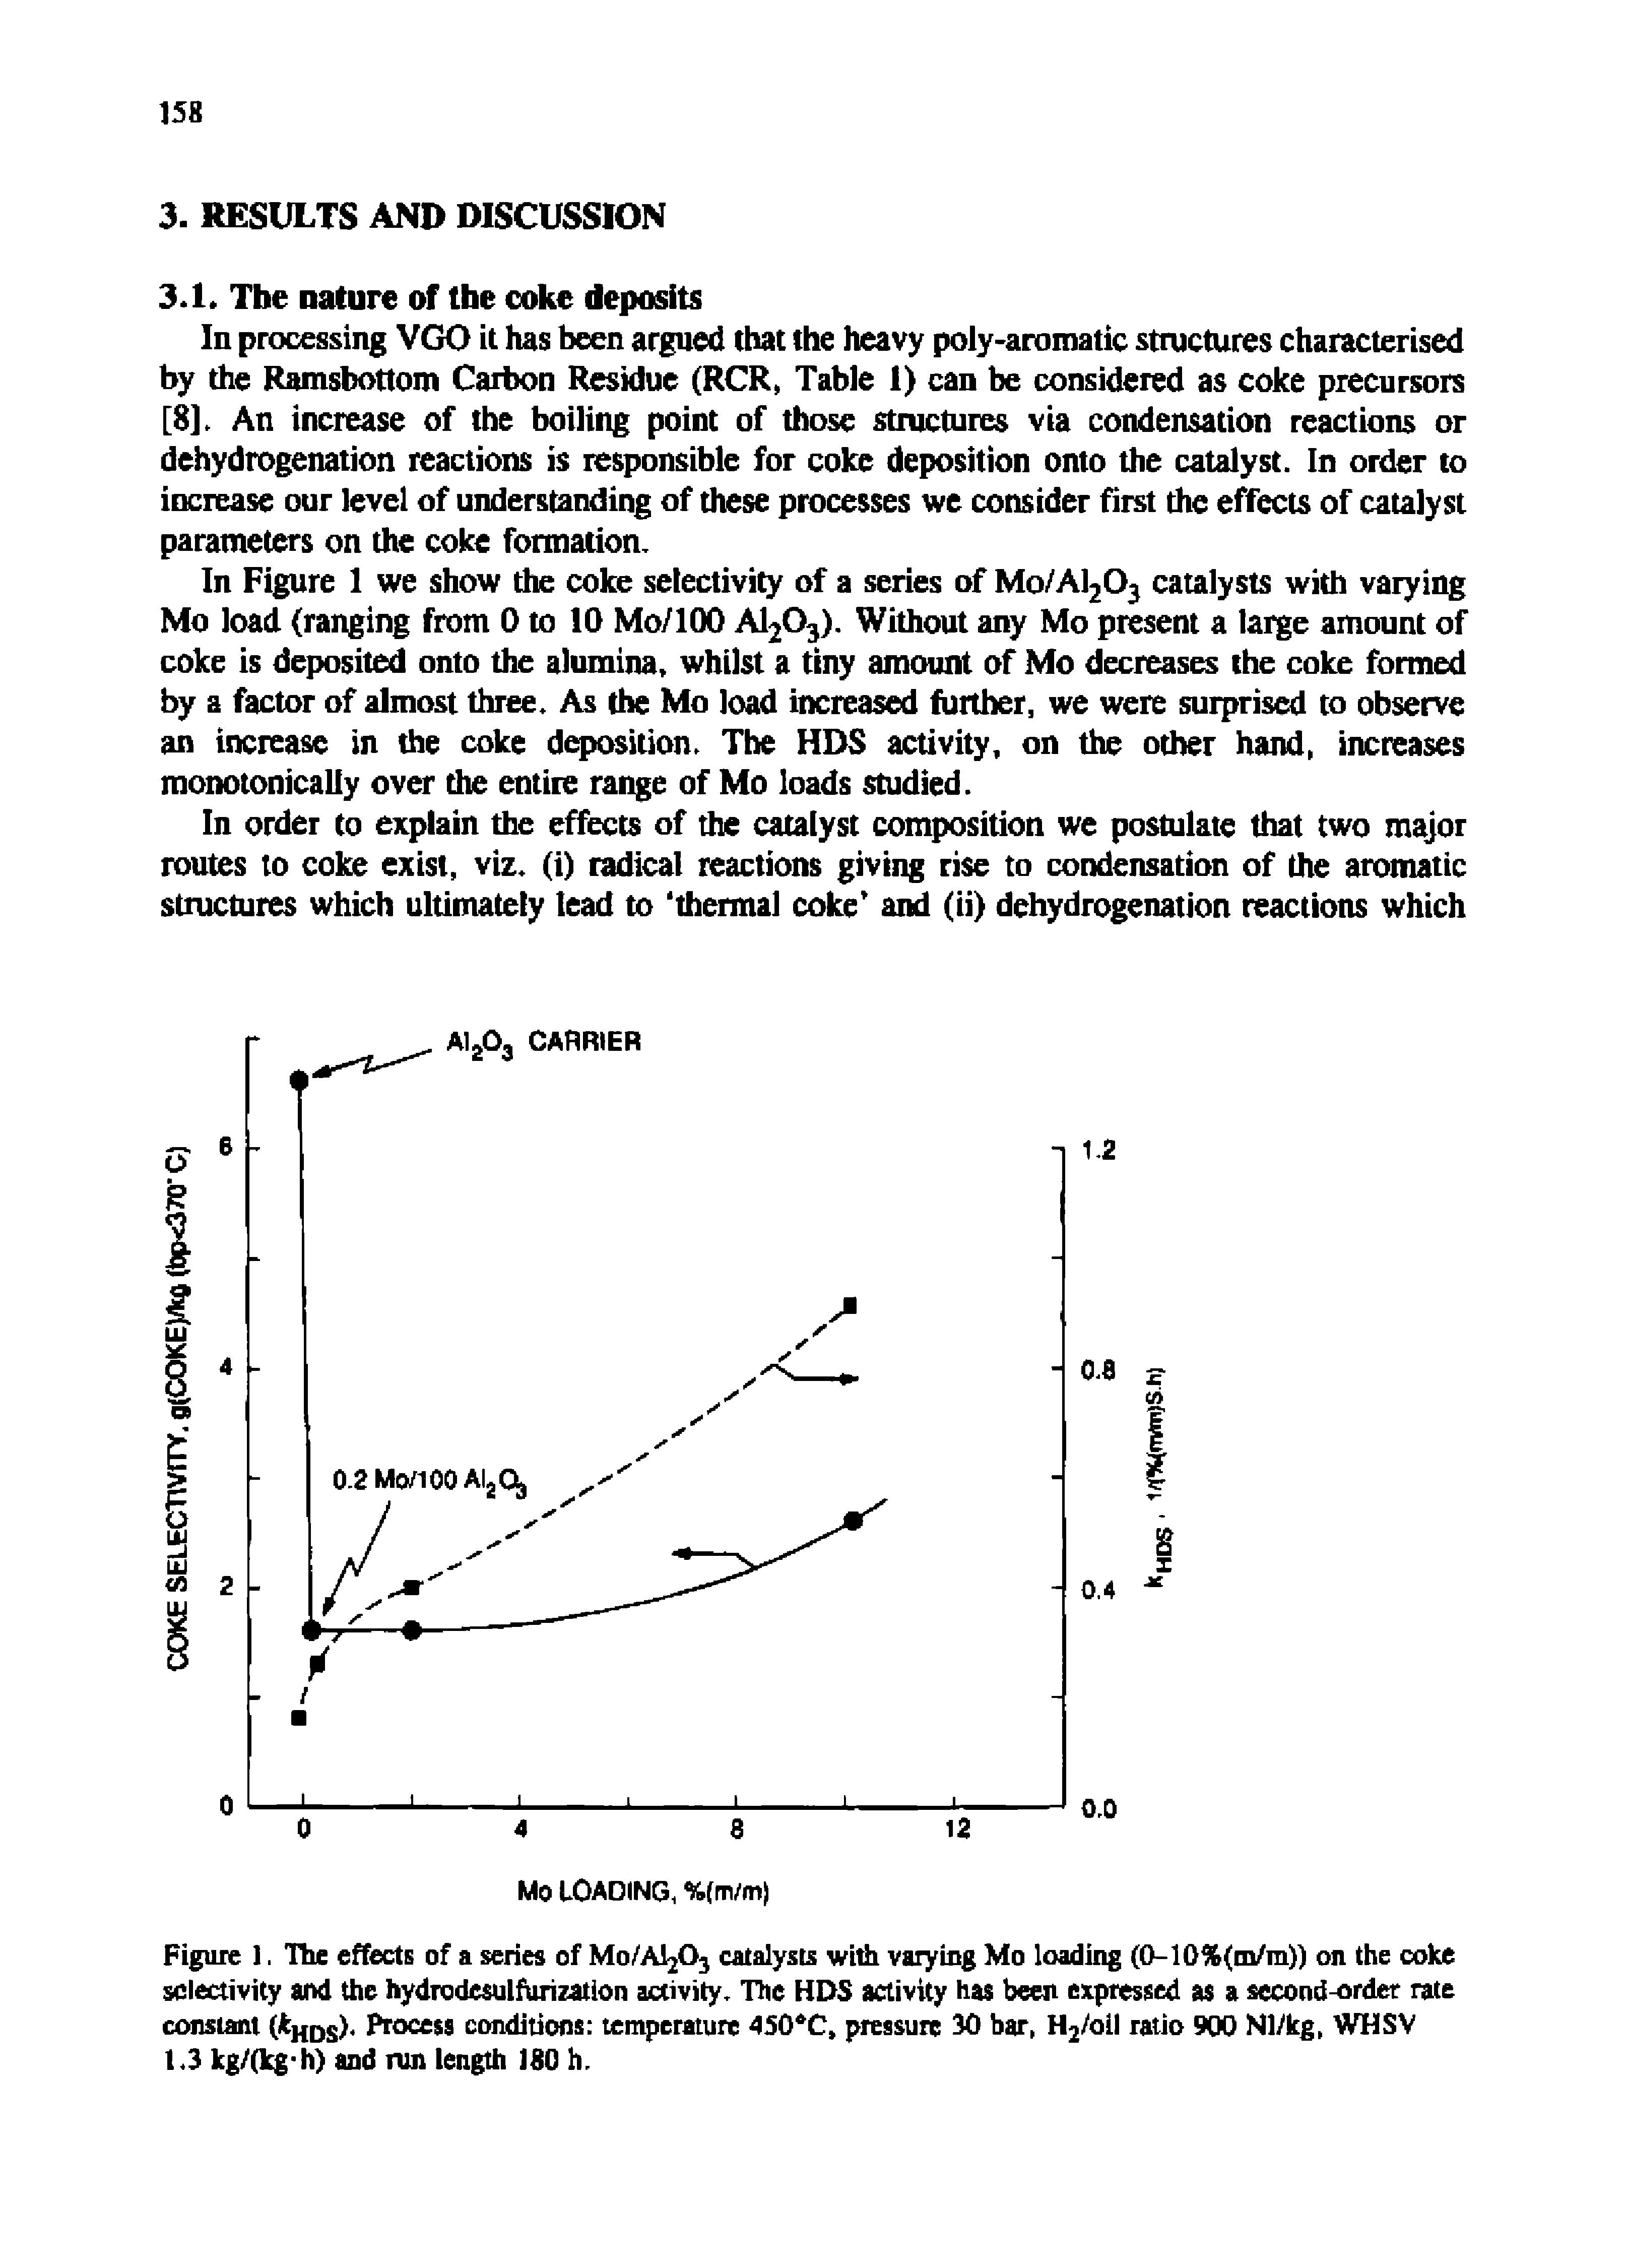 Figure 1. The effects of a series of Mo/AljOj catalysts with varying Mo loading (0-10%(m/m)) on the coke selectivity and the hydrodesulfurization activity. The HDS activity has been expressed as a second-order rate constant ( hds)< Process conditions temperature 450 C, pressure 30 bar, H2/oil ratio 900 Nl/kg, WHSV 1.3 kg/(kg h) and run length 180 h.